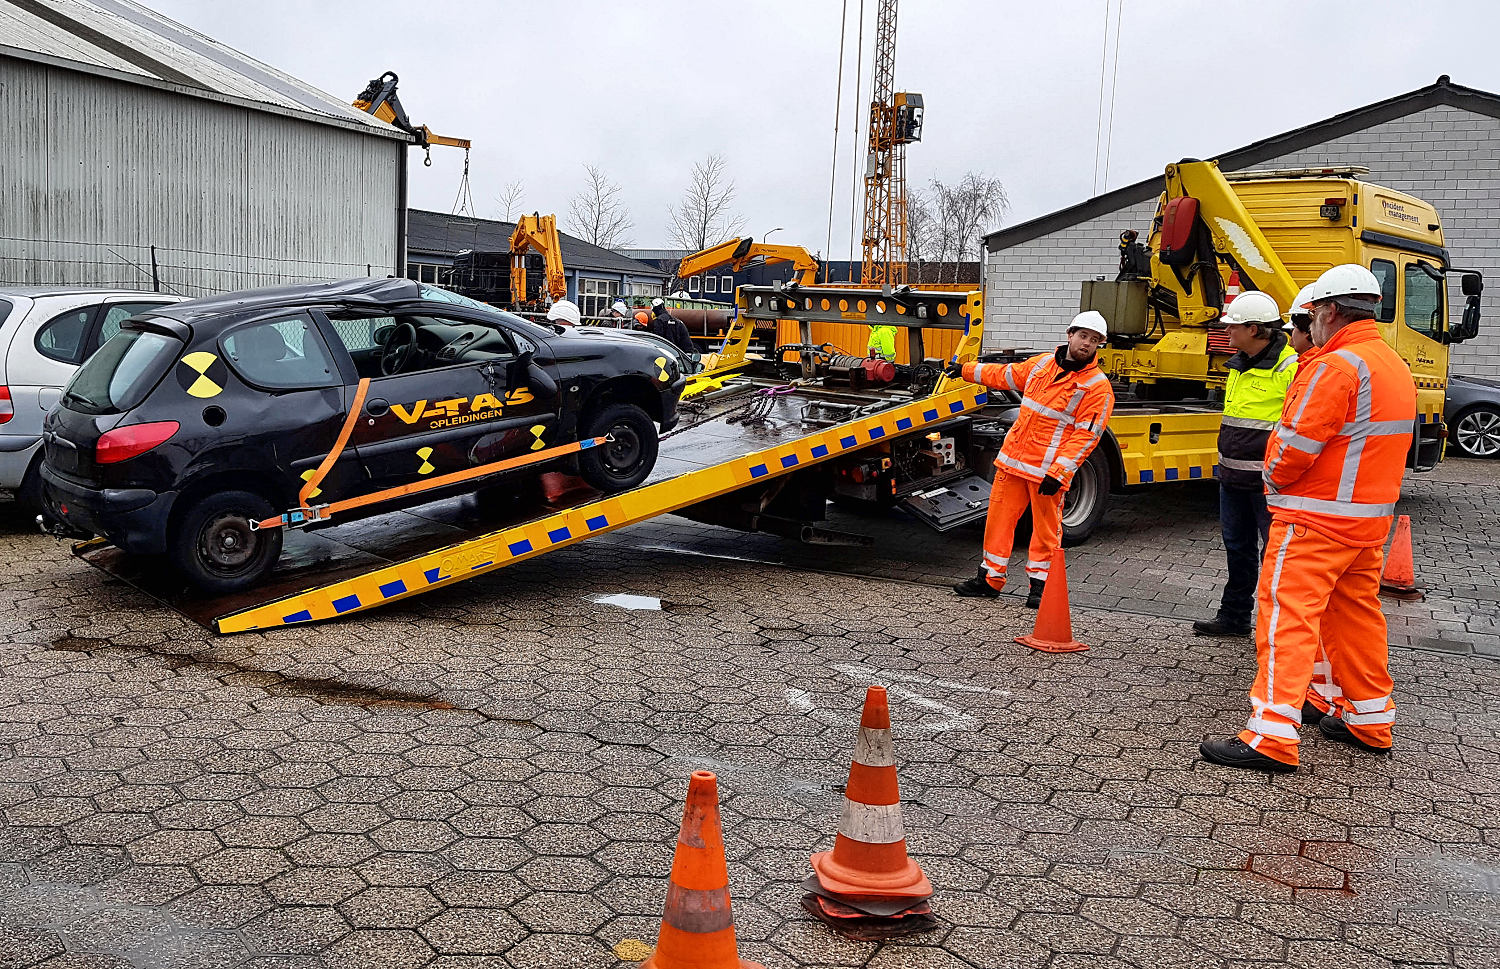 Marijn van der Grond of V-TAS at work with three trainee recovery drivers on 12 December 2019 in Bladel